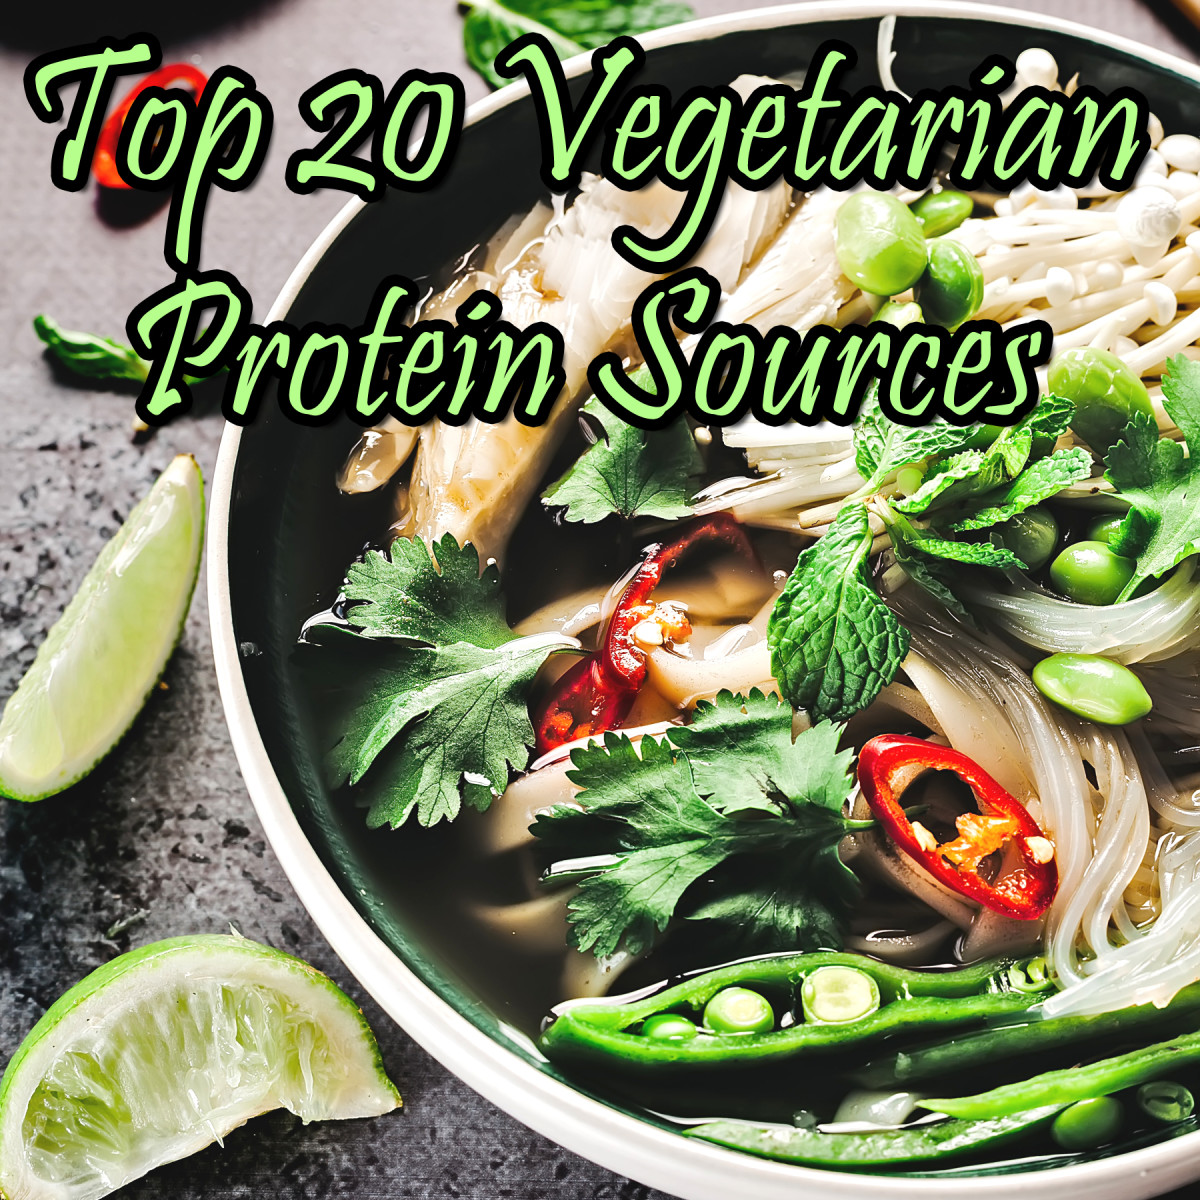 Top 20 Vegetarian Friendly, Plant-Based Sources of Protein